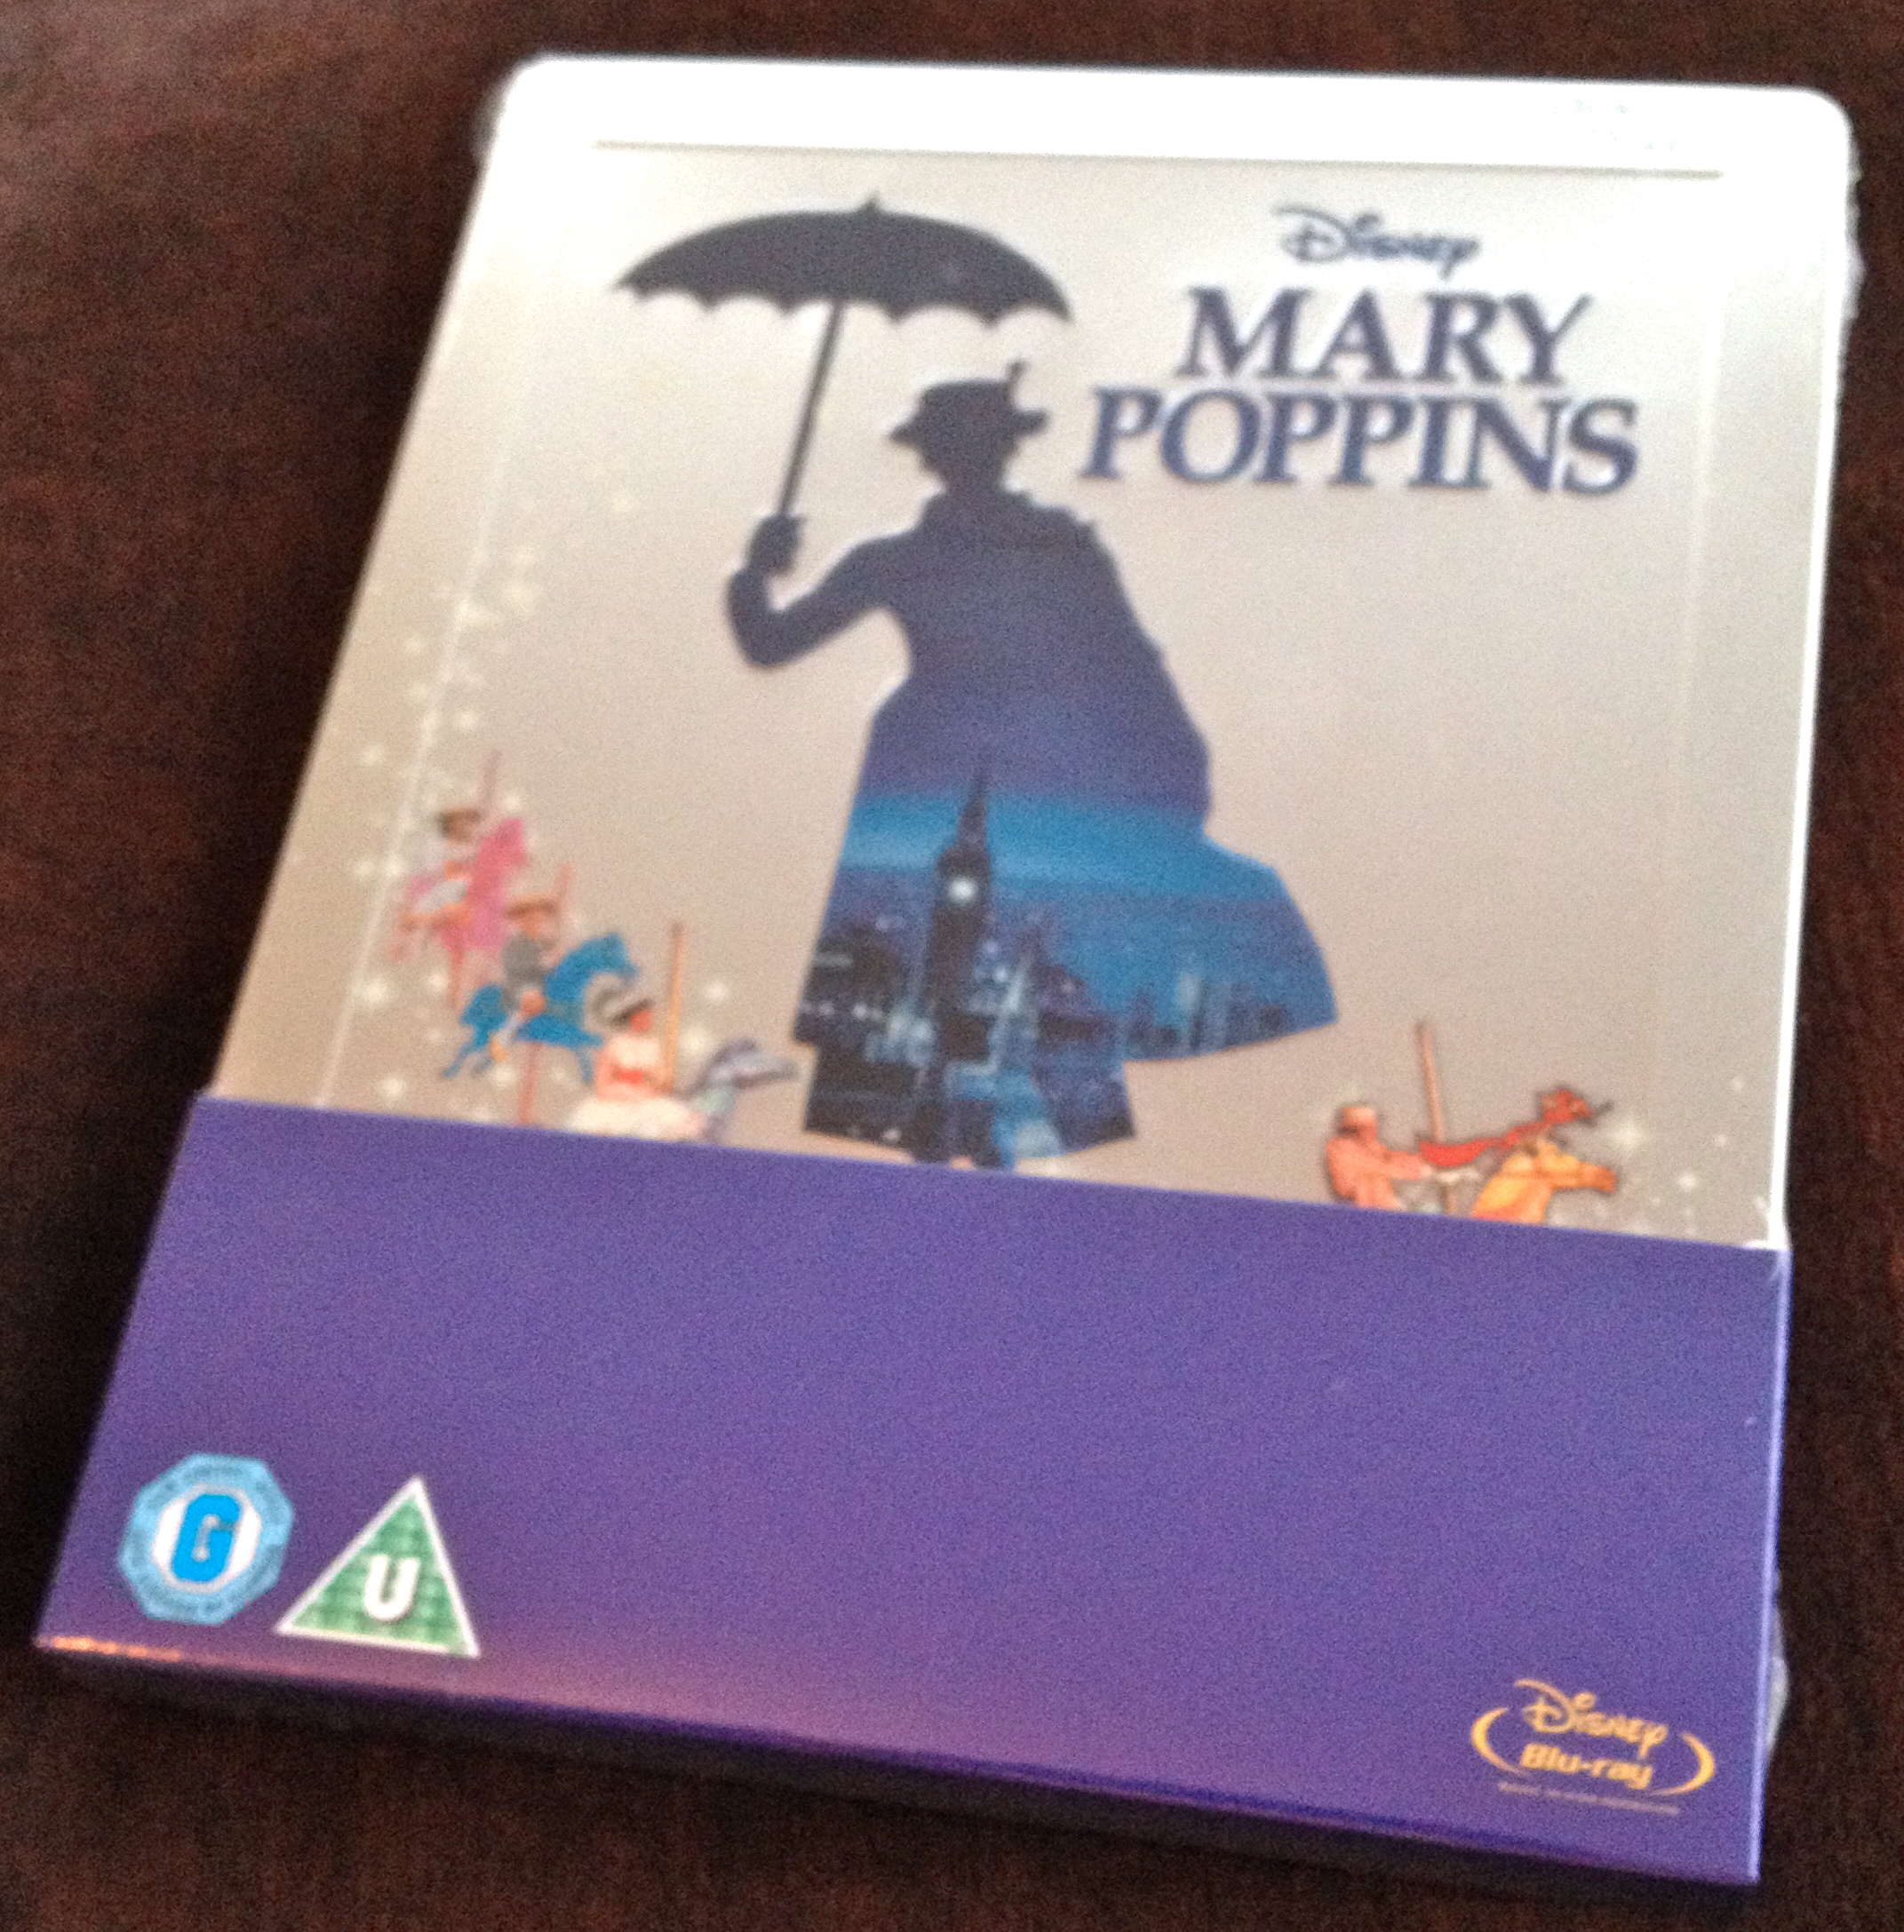 MARY POPPINS (Zavvi...Released March 10th, 2014)